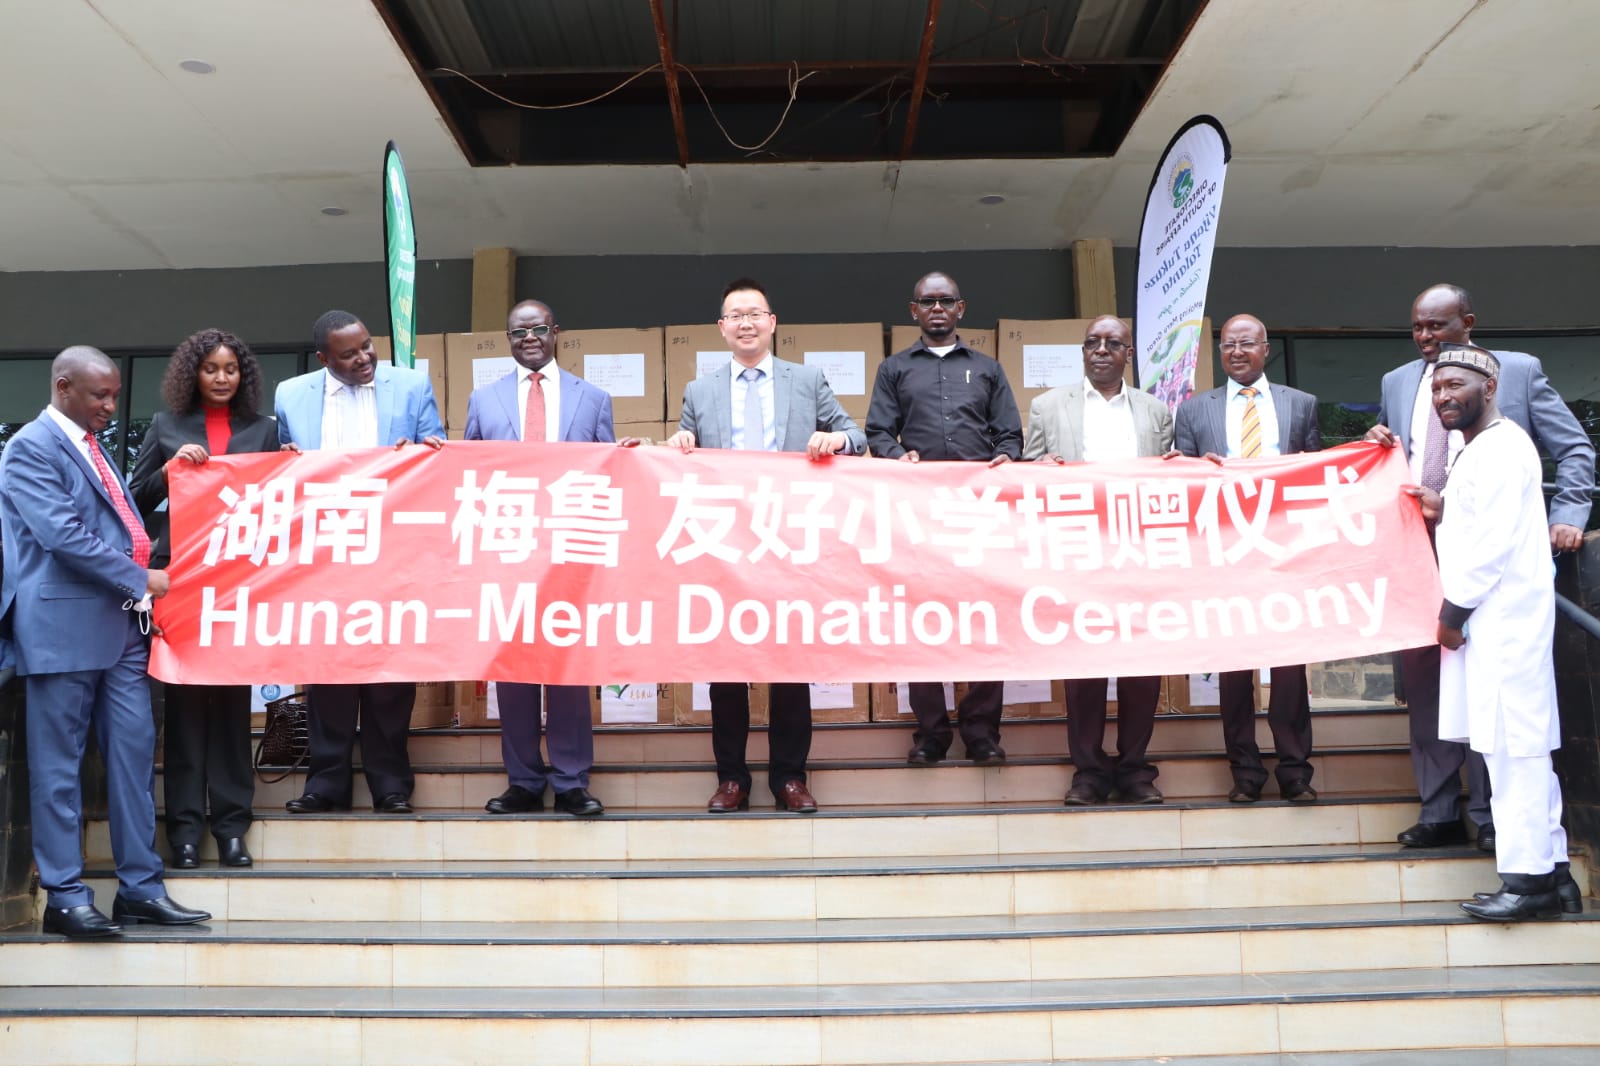 Chinese Schools Donate Art Work Equipment To Meru County Schools Following Friendship Agreement Signed Last Year By Governor Kiraitu.